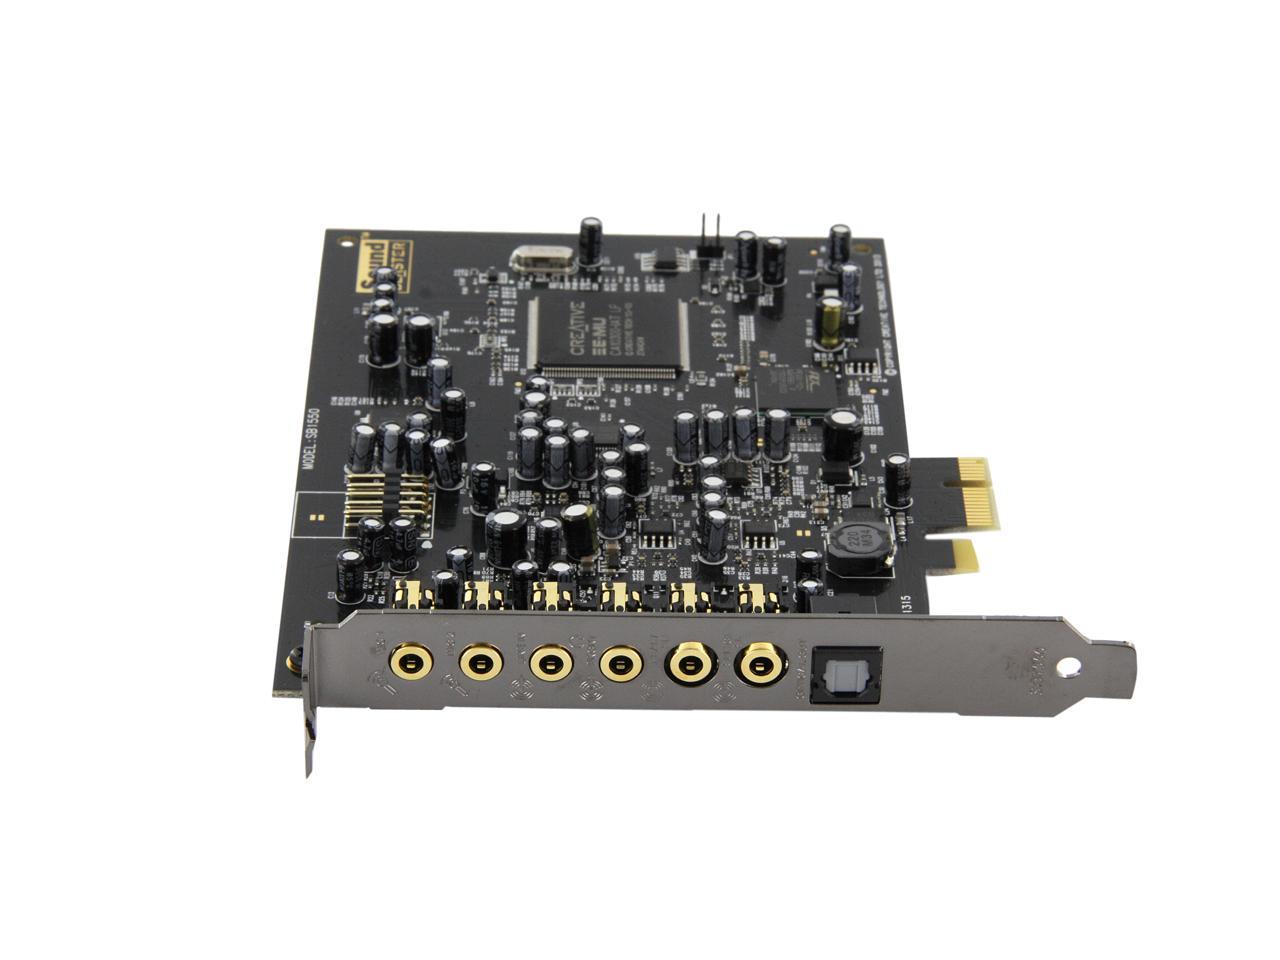 creative sound blaster audigy pcie rx 7.1 sound card with high performance headphone amp